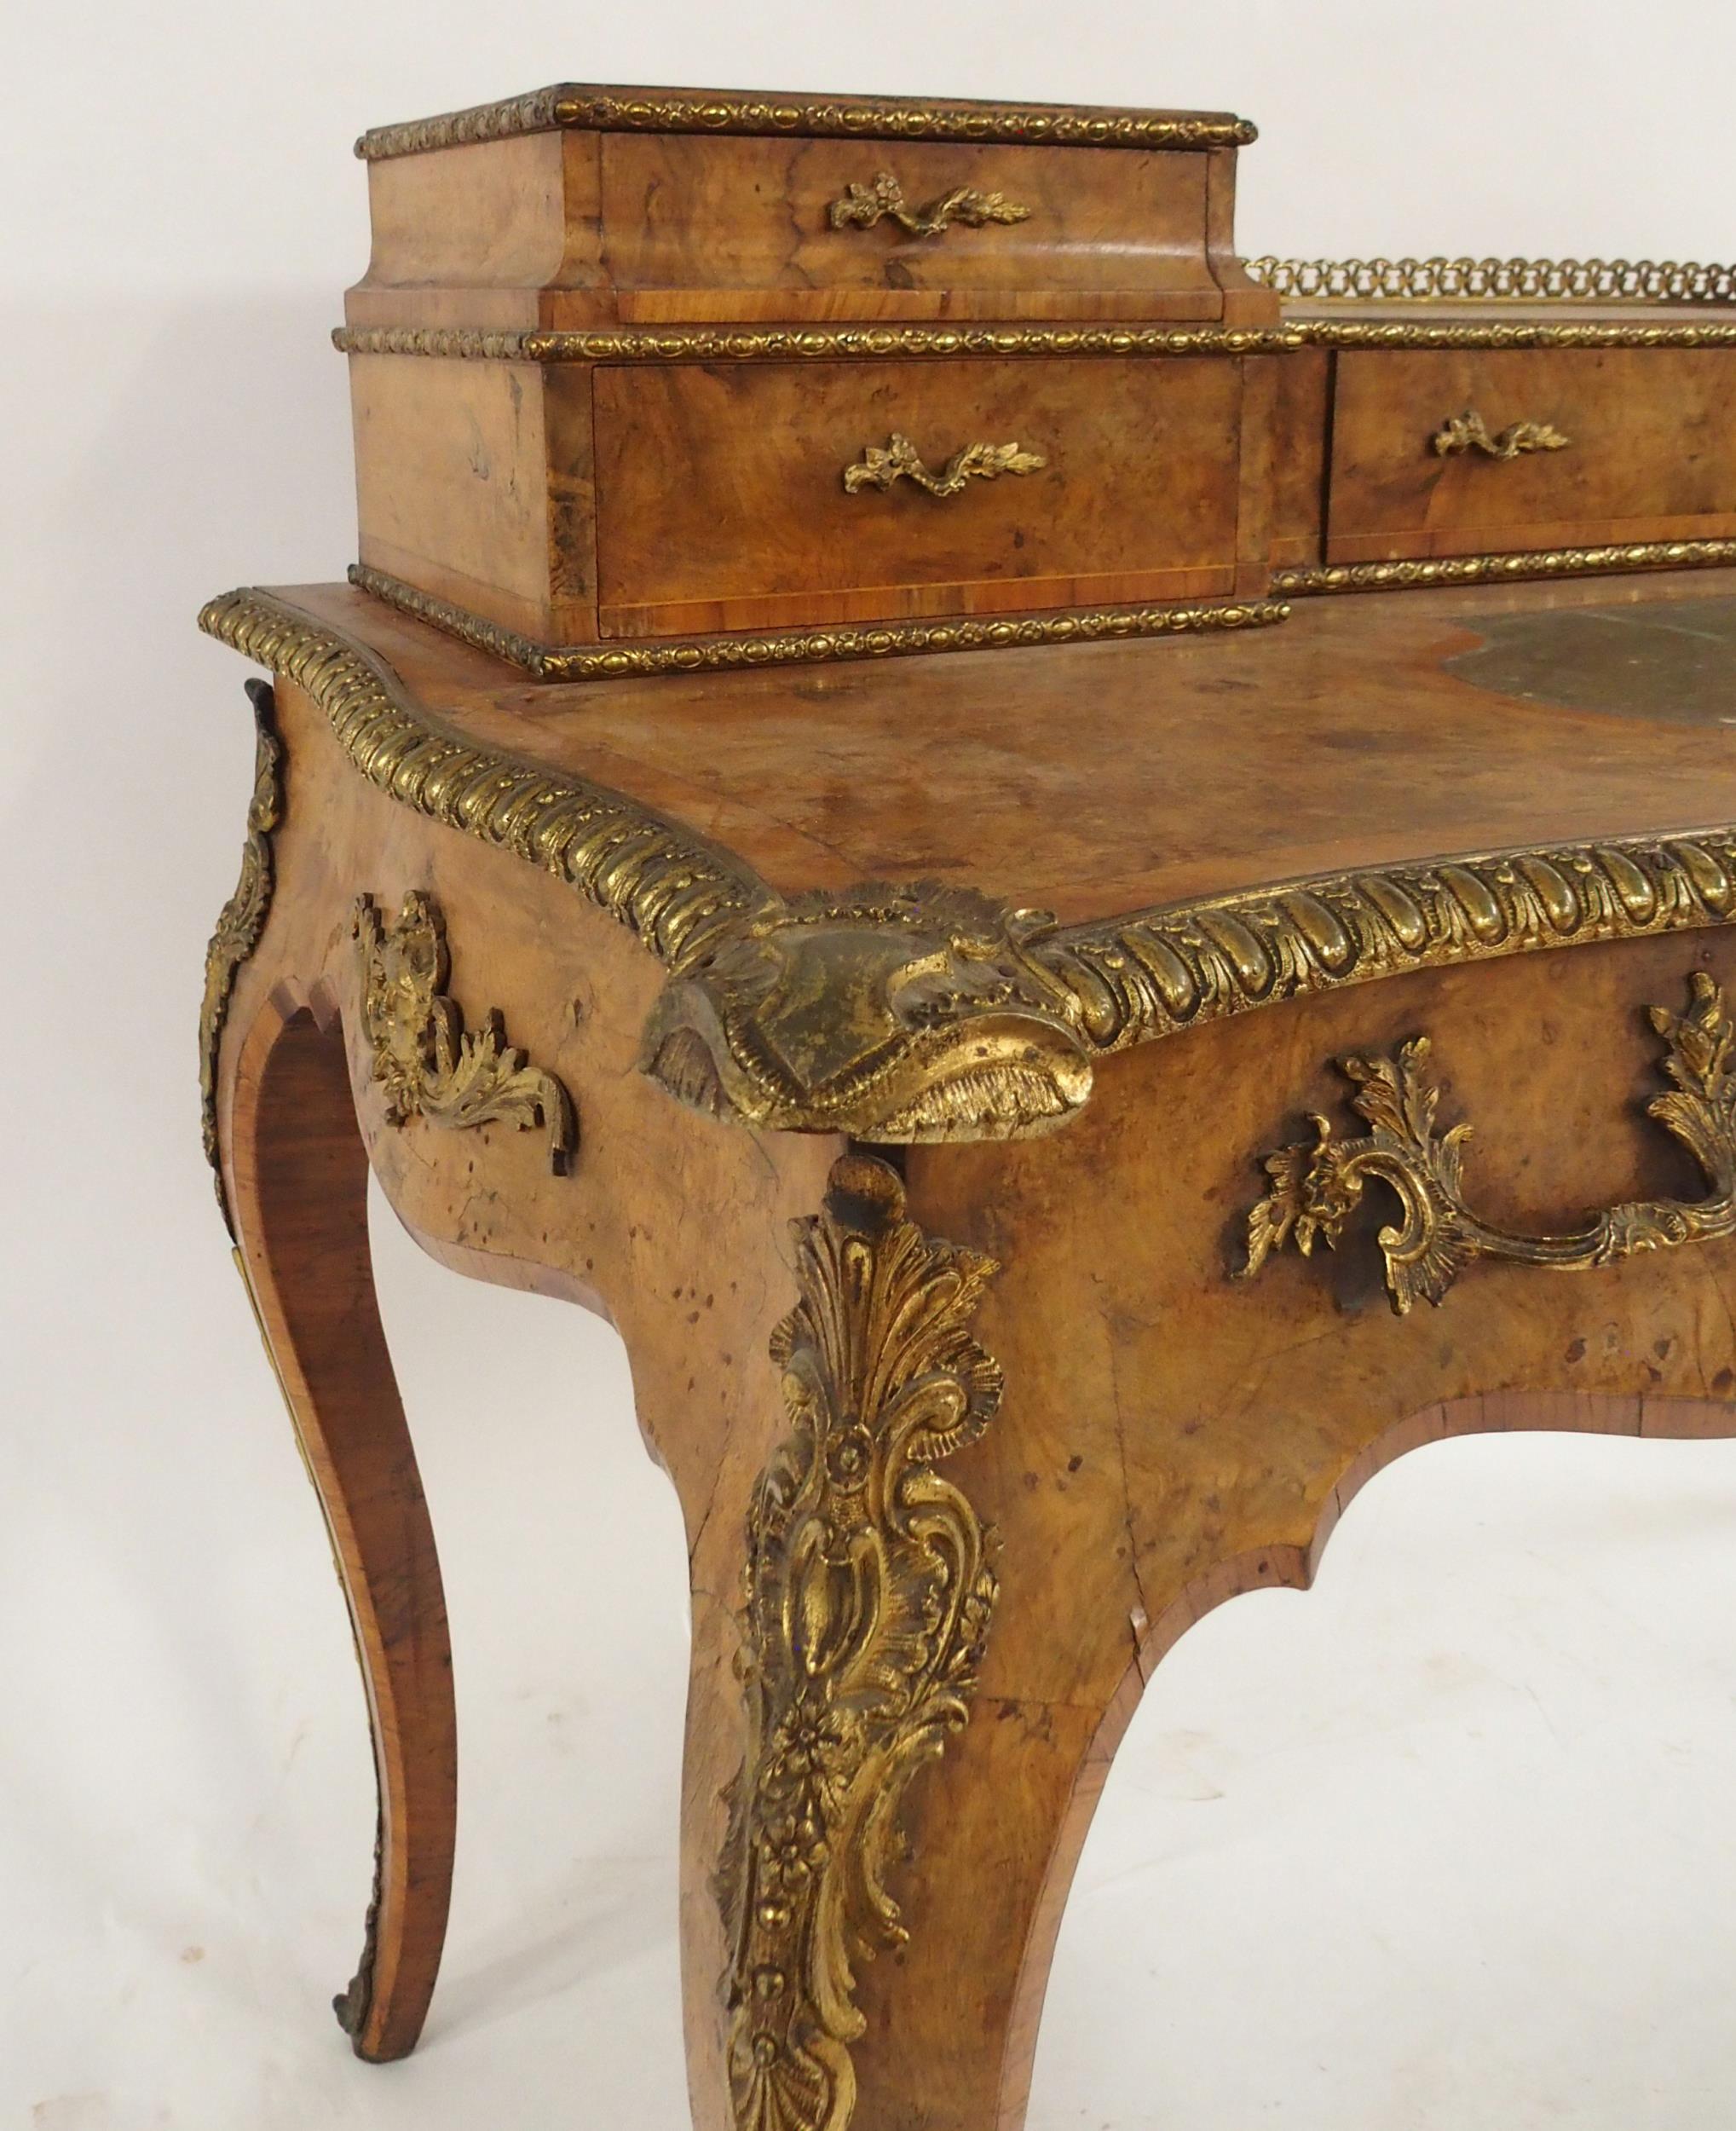 A LOUIS XVI STYLE BURR WALNUT AND ORMOLU MOUNTED BUREAU PLAT with five drawered superstructure - Image 13 of 14